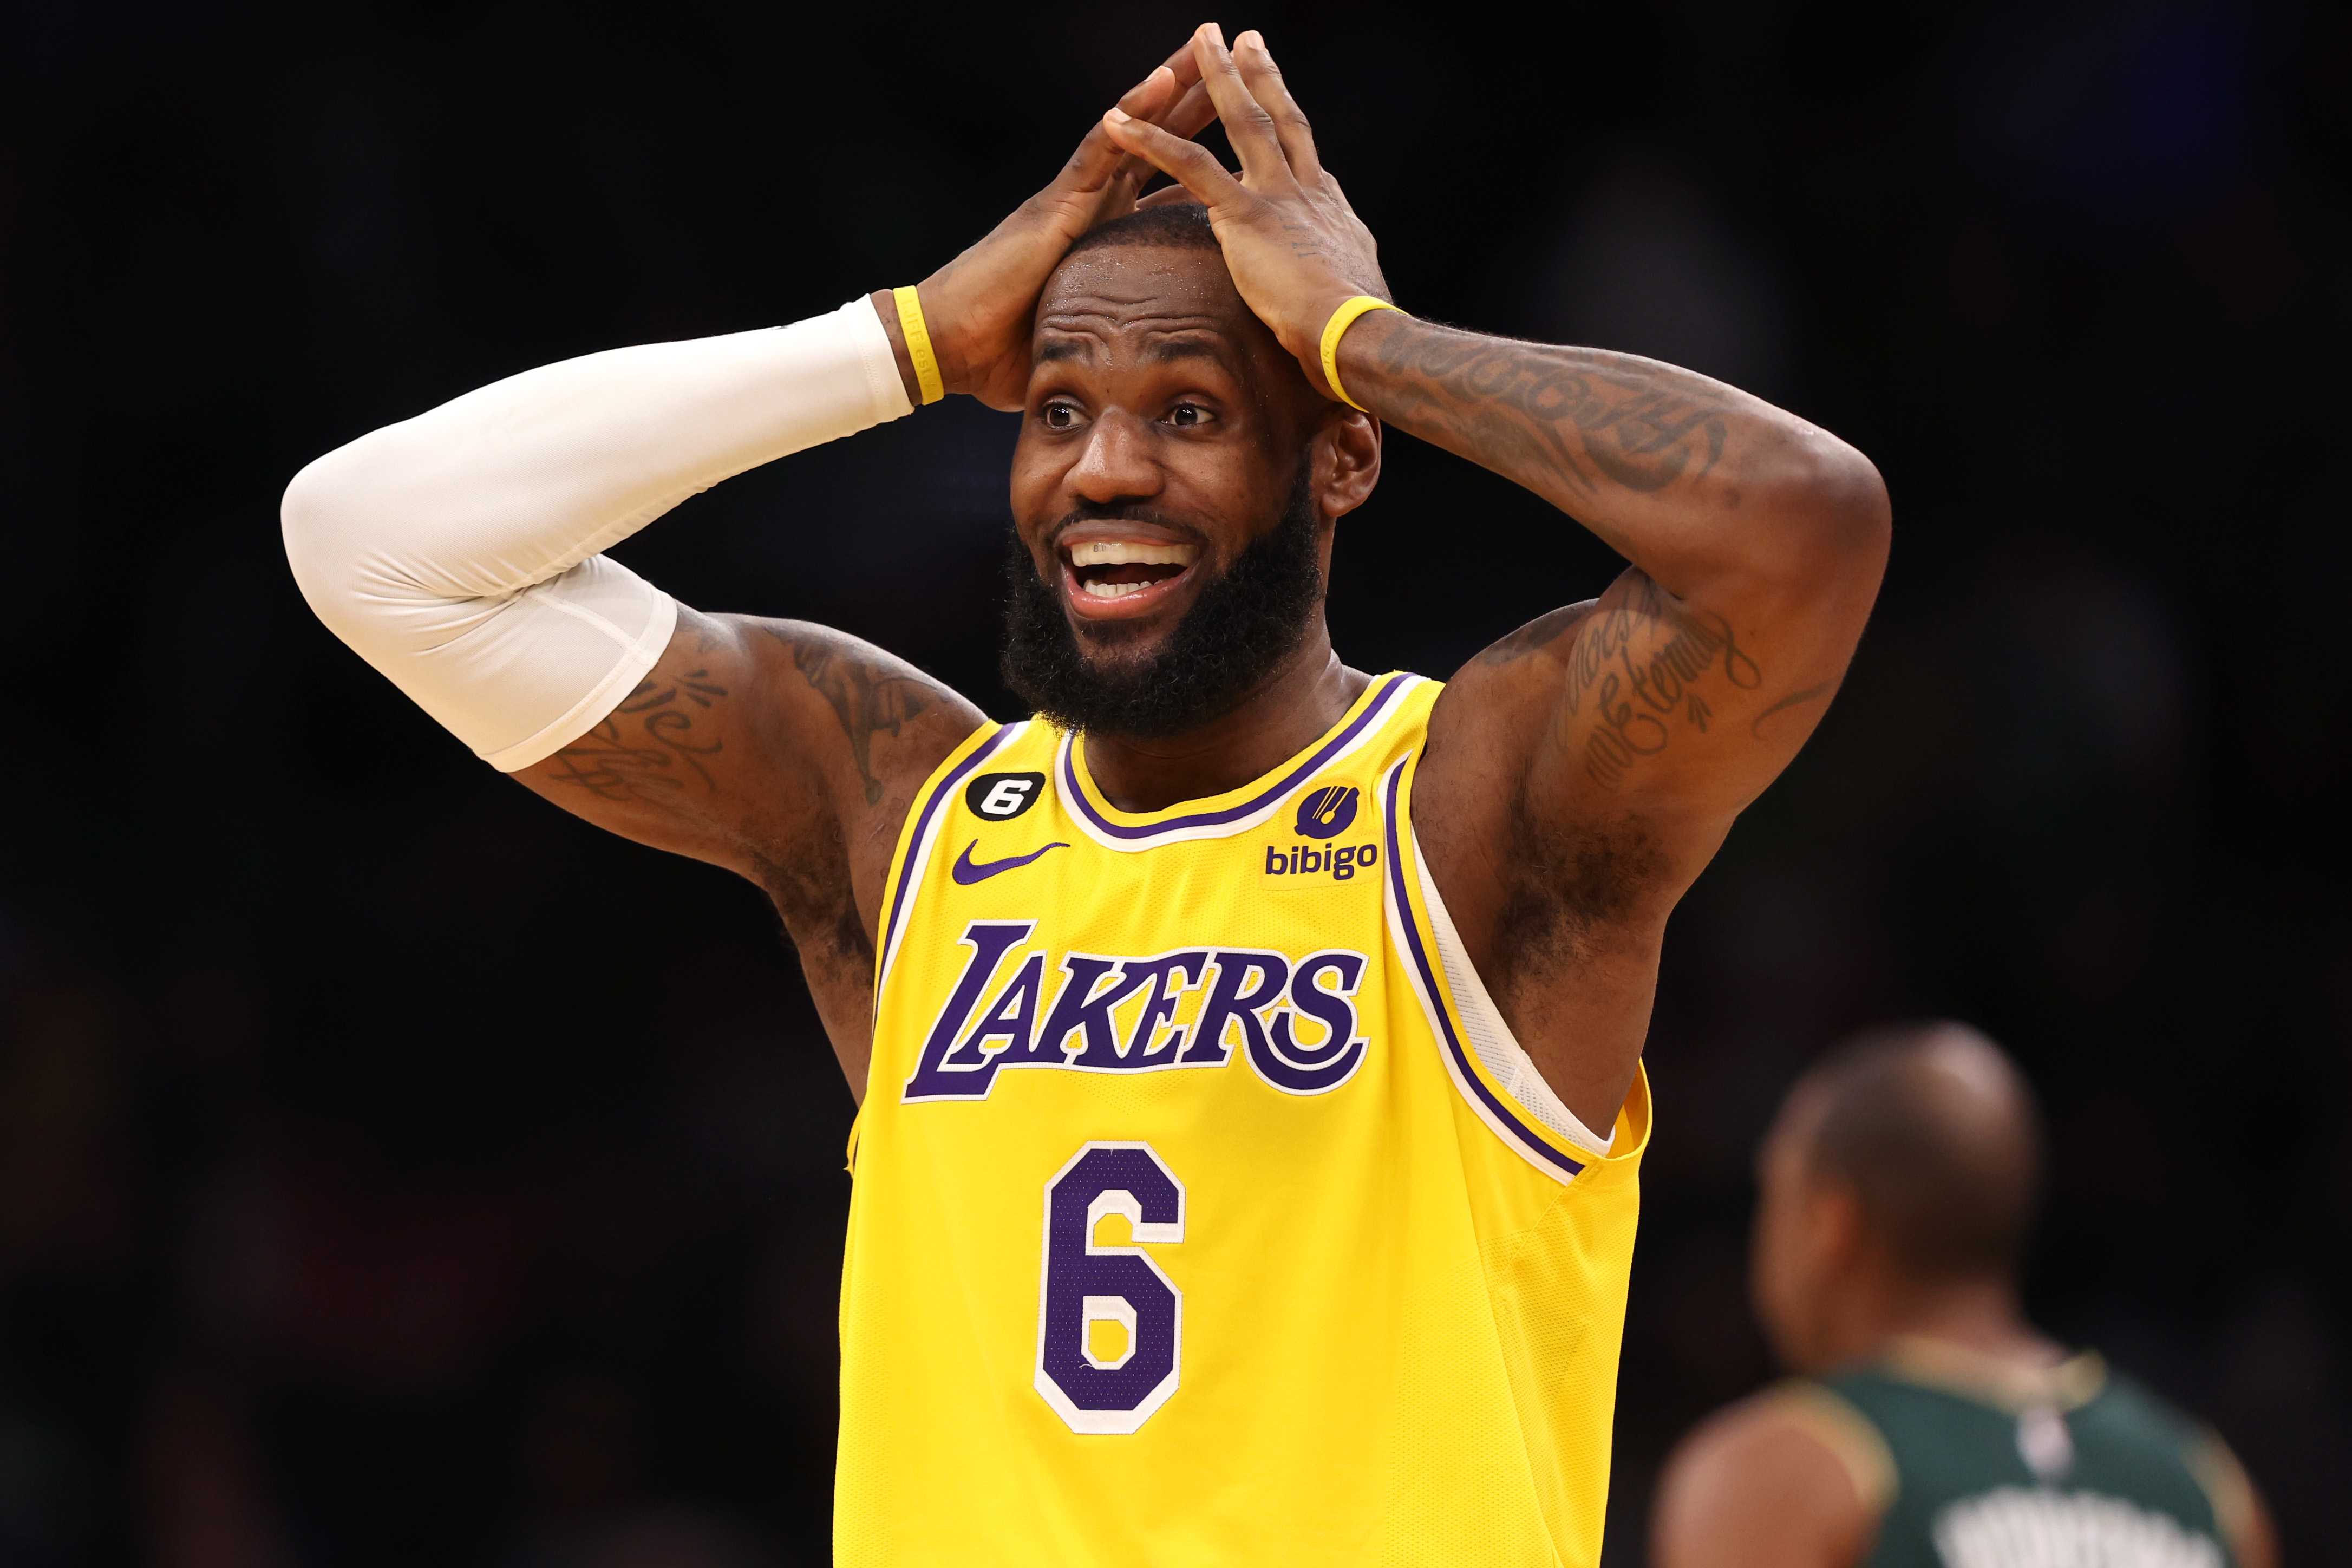 LeBron James out of the Lakers? Thursday is a key day to get a